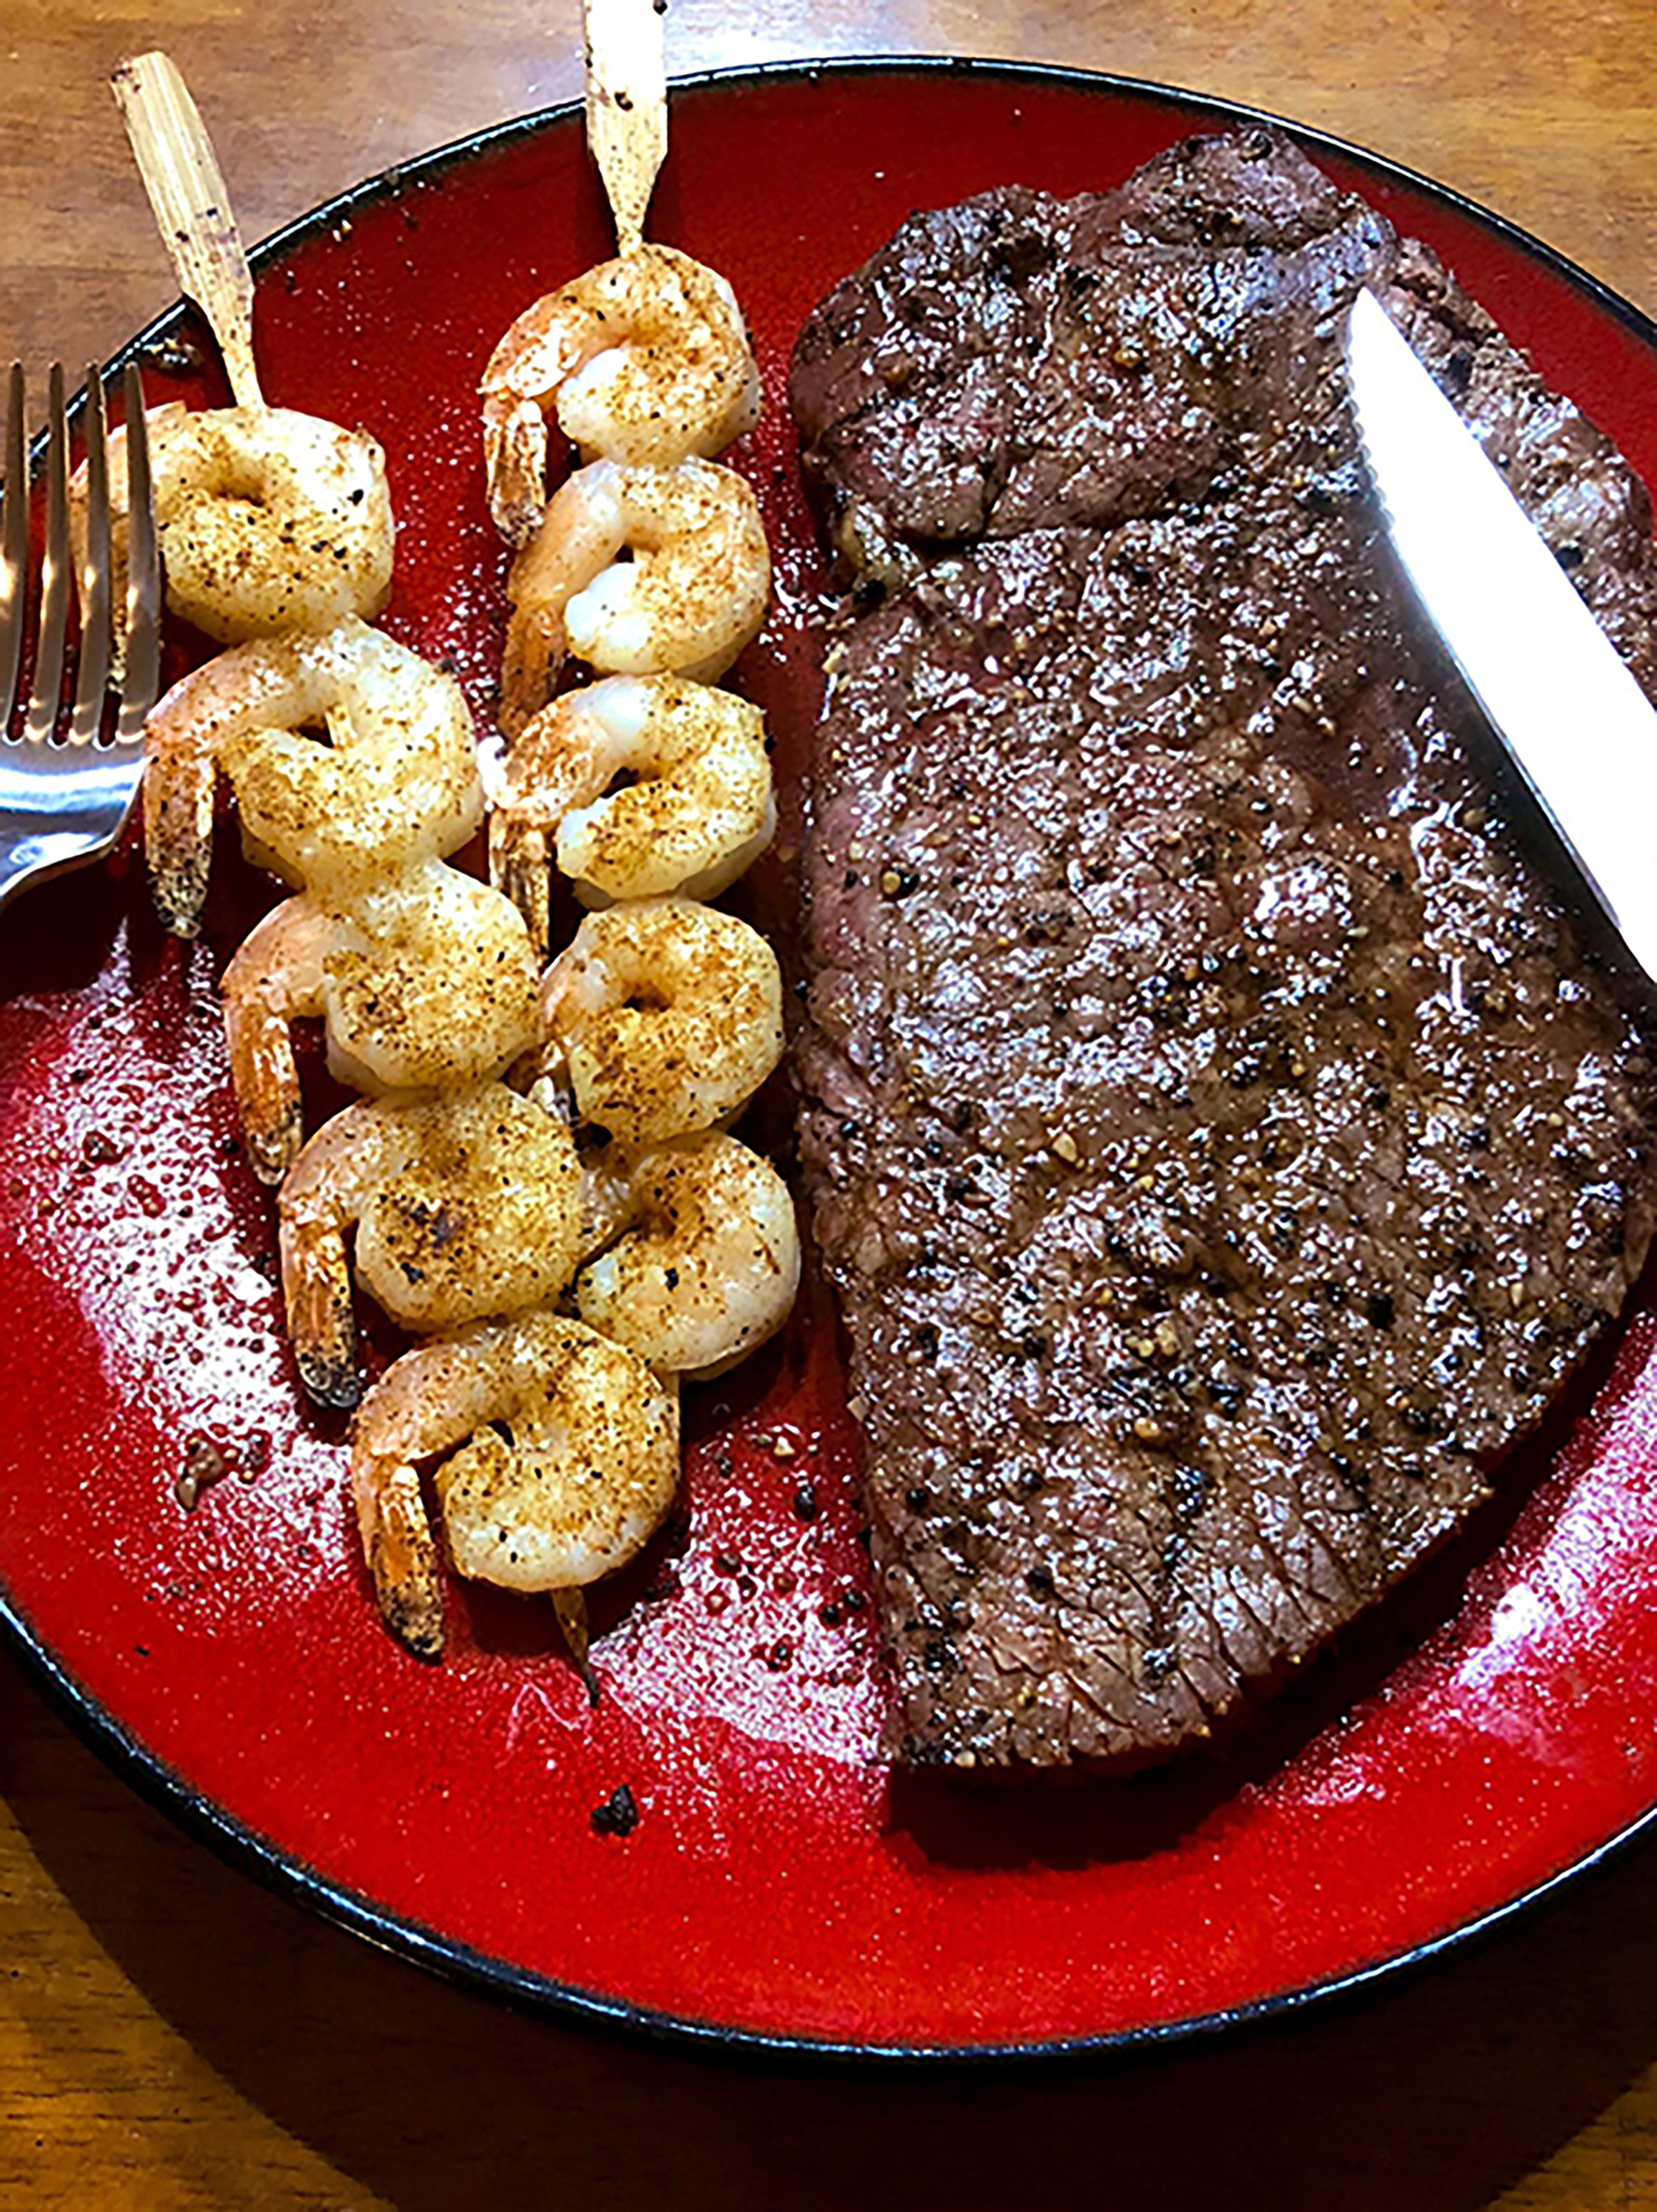 Steak on a plate with shrimp skewers.